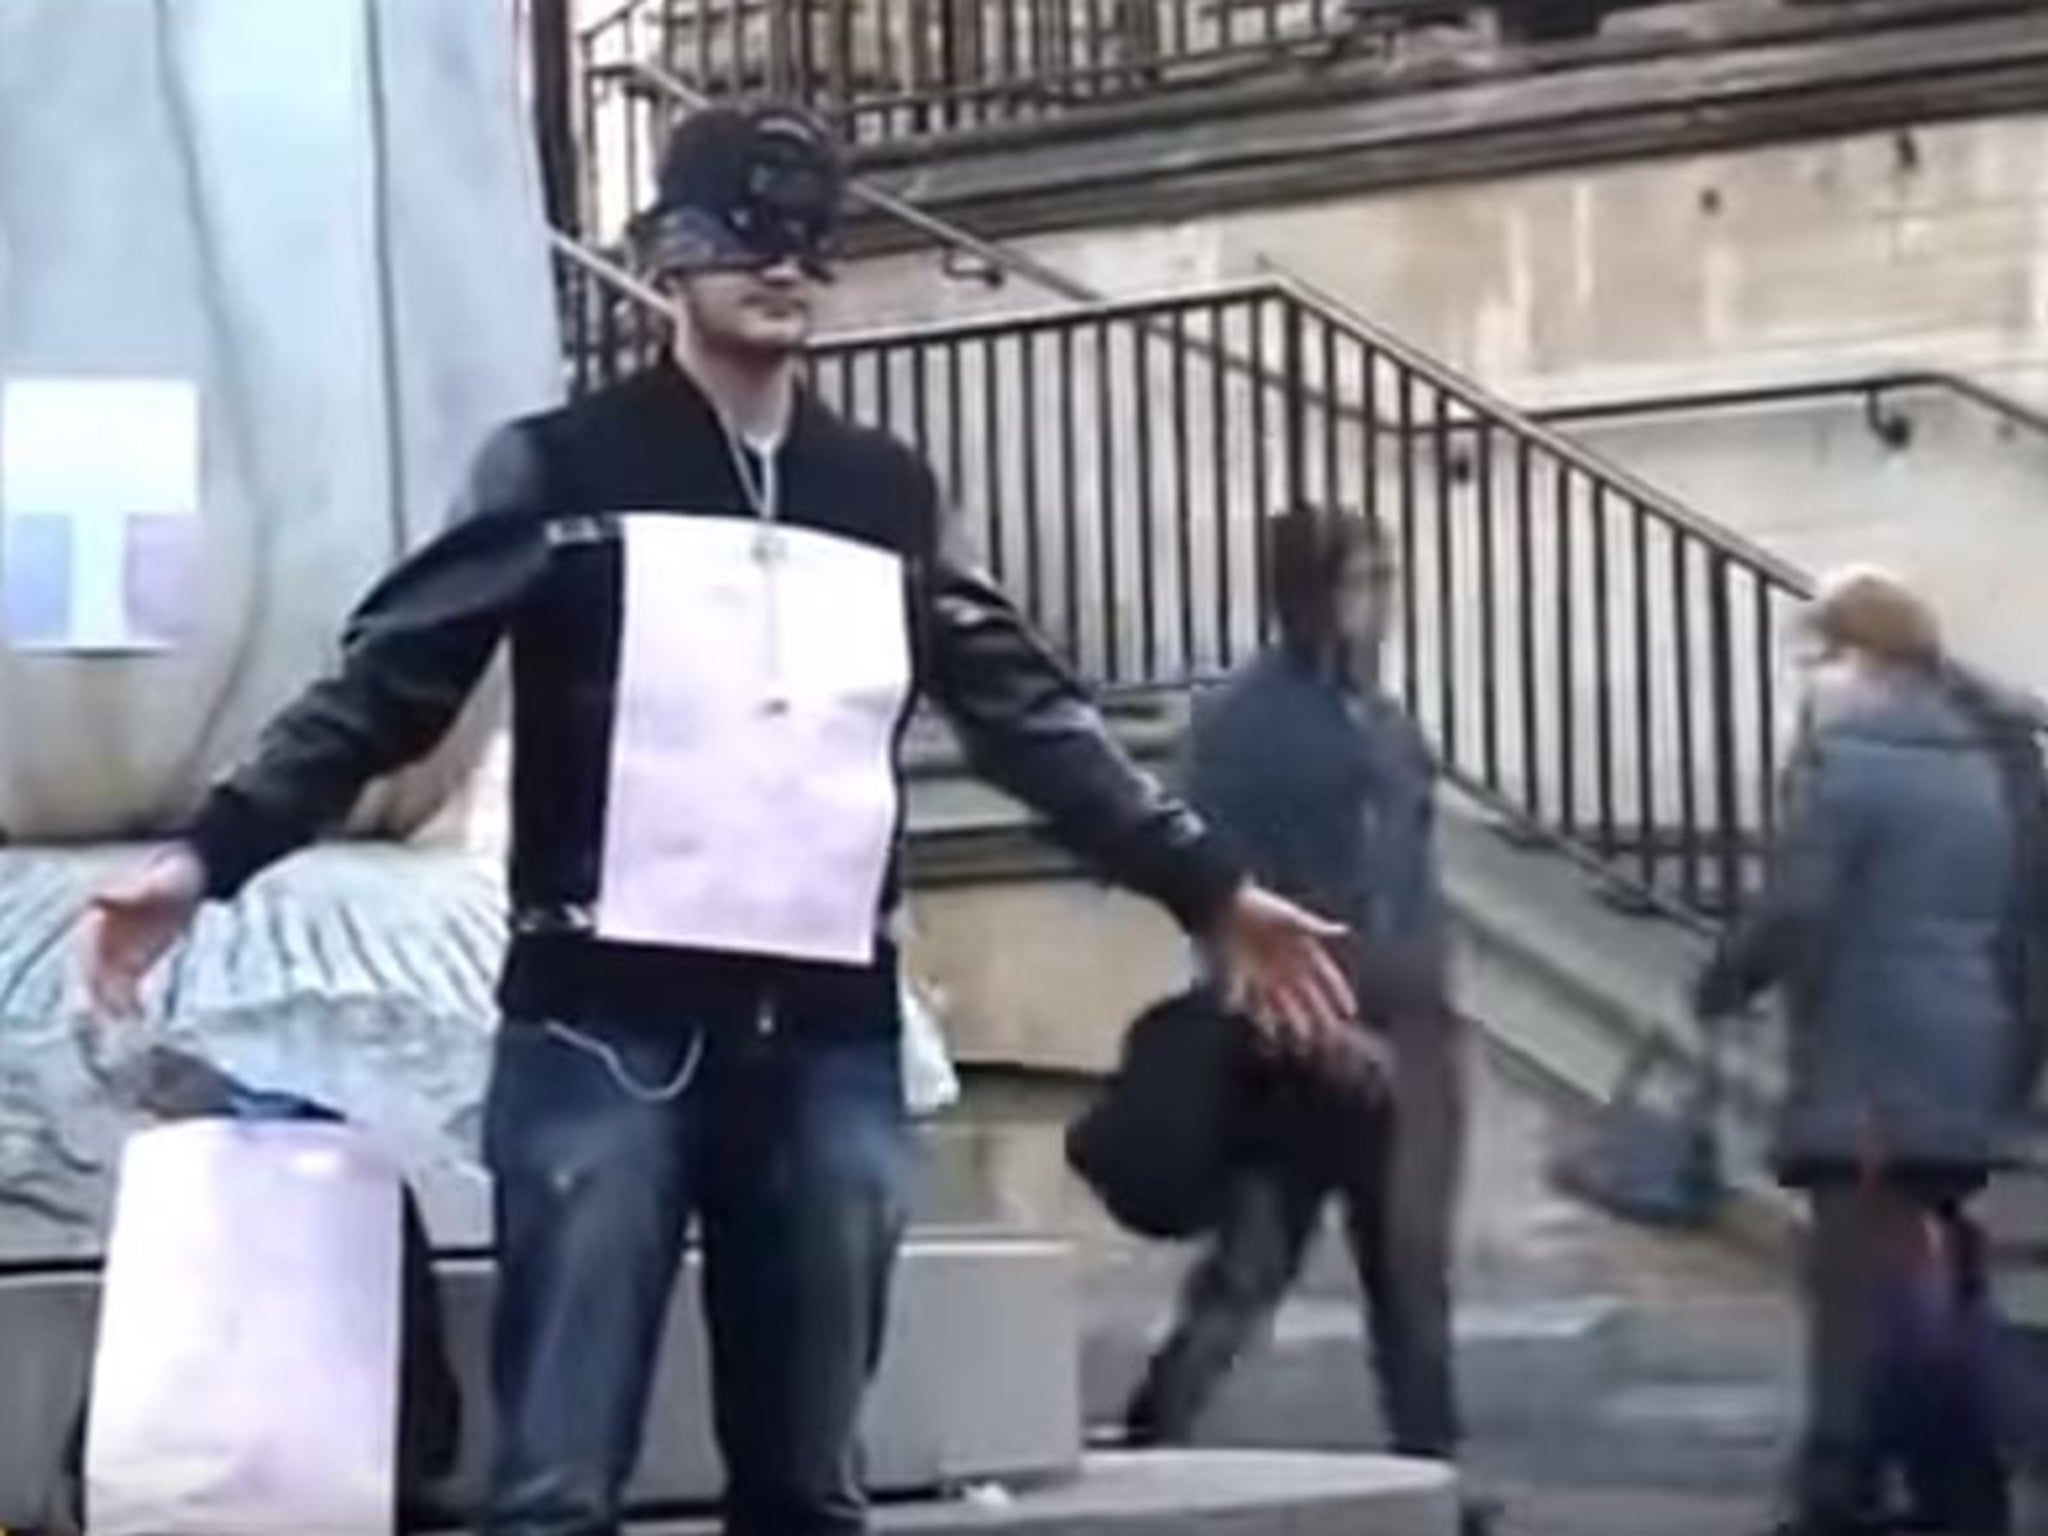 Yusuf Pirot offered out free hugs to strangers while blindfolded to combat Islamophobia